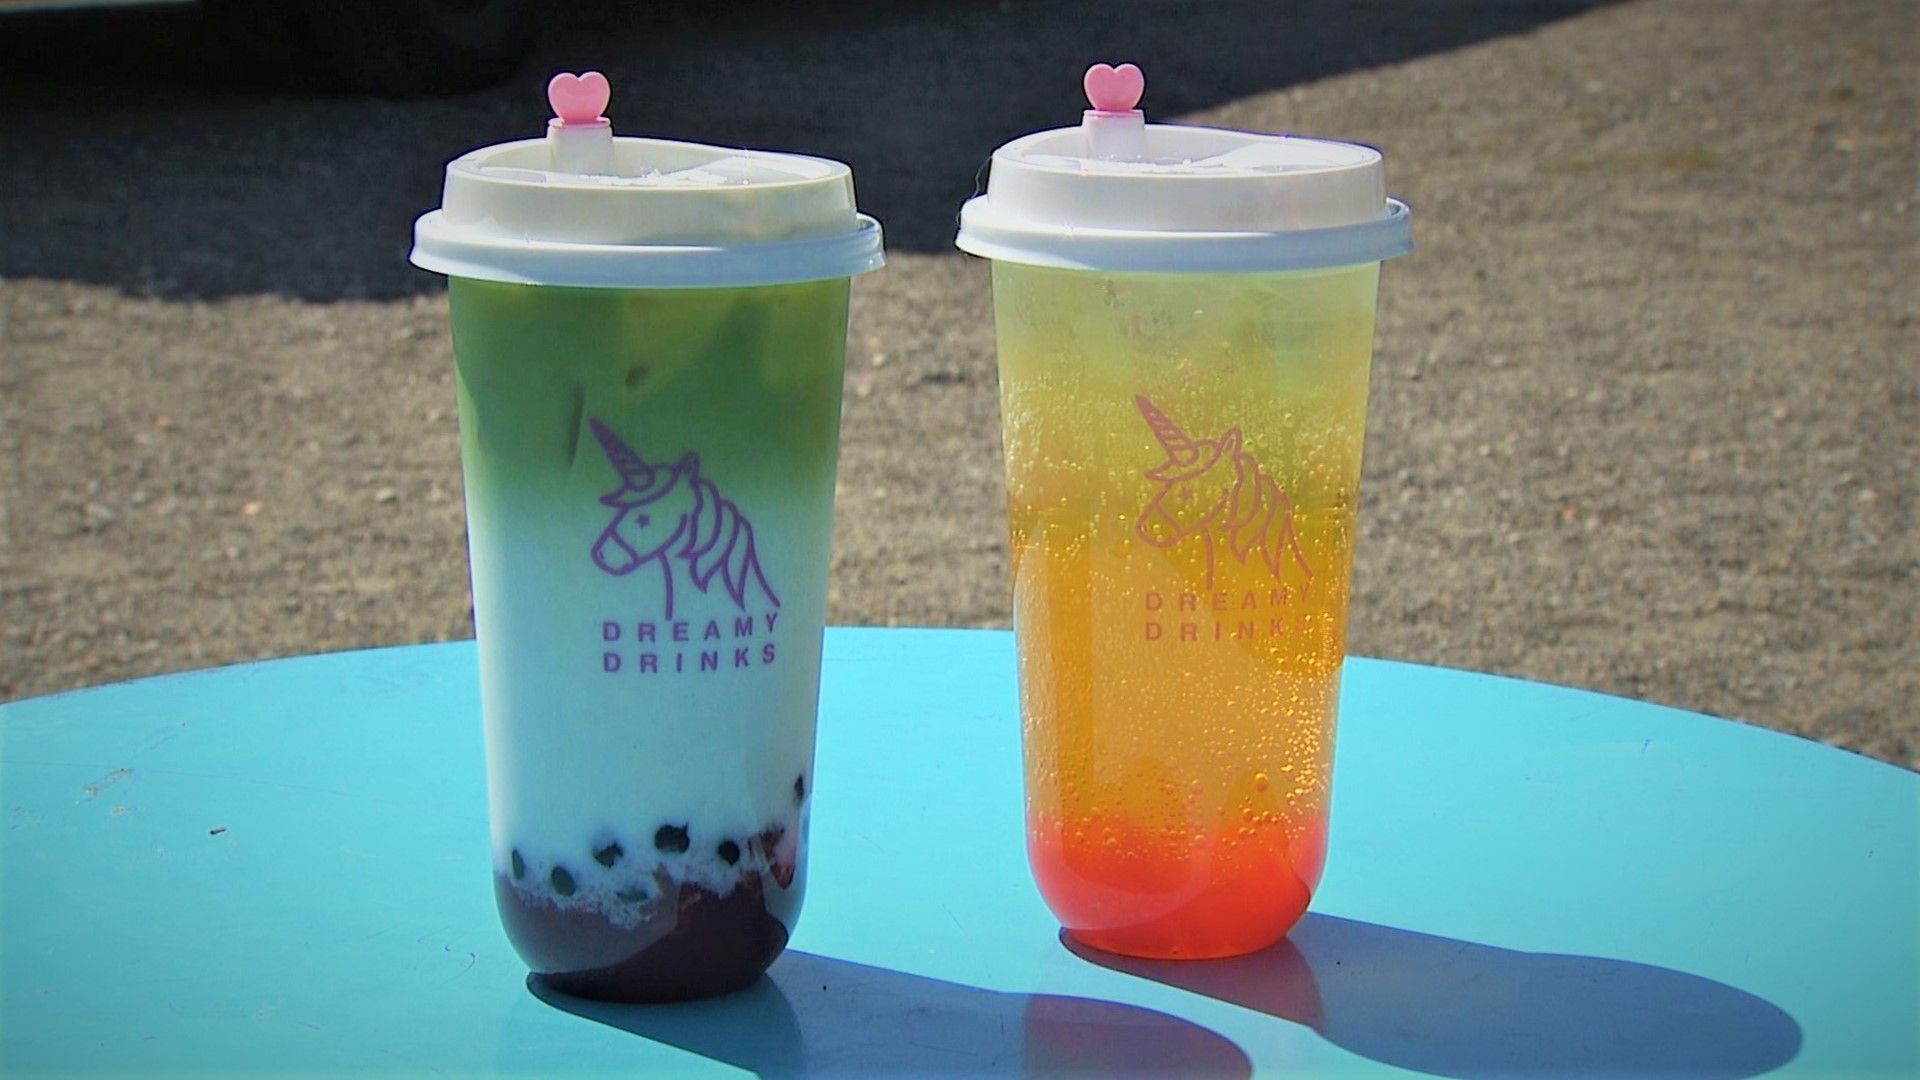 Instagram foodie heaven at Seattle's first bubble tea food truck